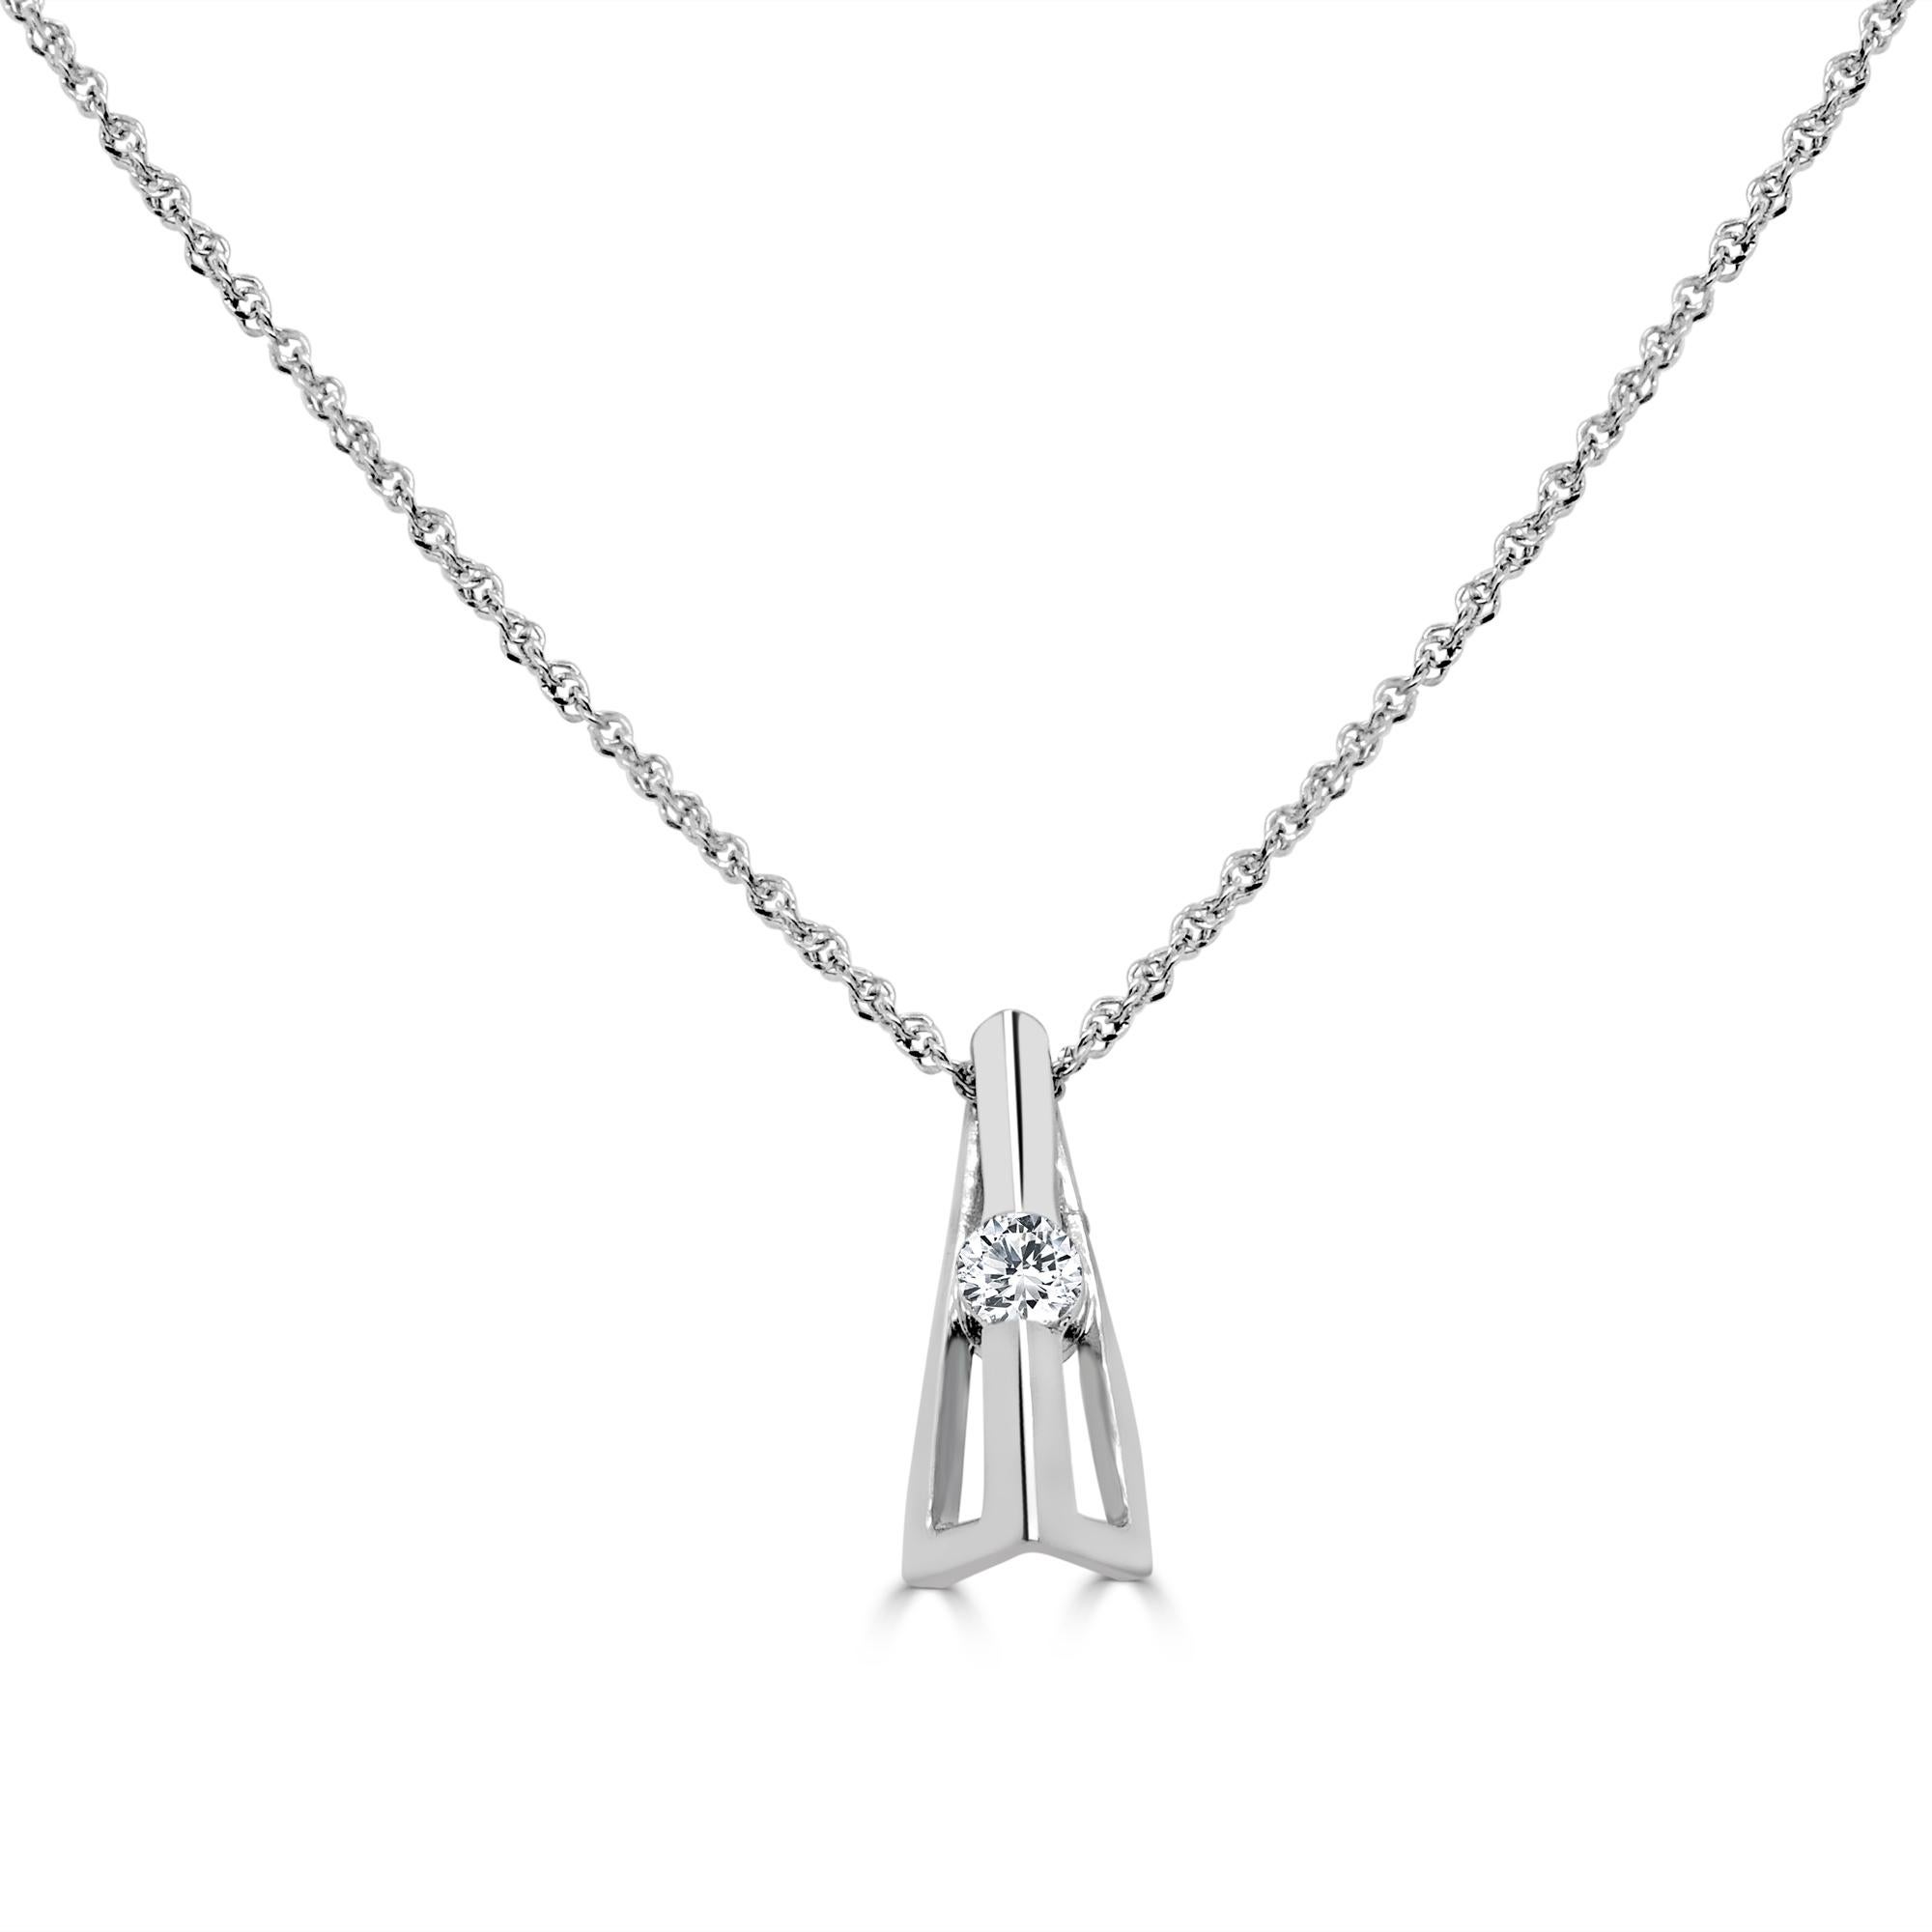 18 Karat White Gold 0.11 Carat Diamond Chain Necklace Wedding Fine Jewelry 

Gentle and elegant pendant is crafted in a sleek white gold. Featuring round cut diamonds, together totaling 0.11 TCW . Suspended from a 16-inch stunning non-tangle, non